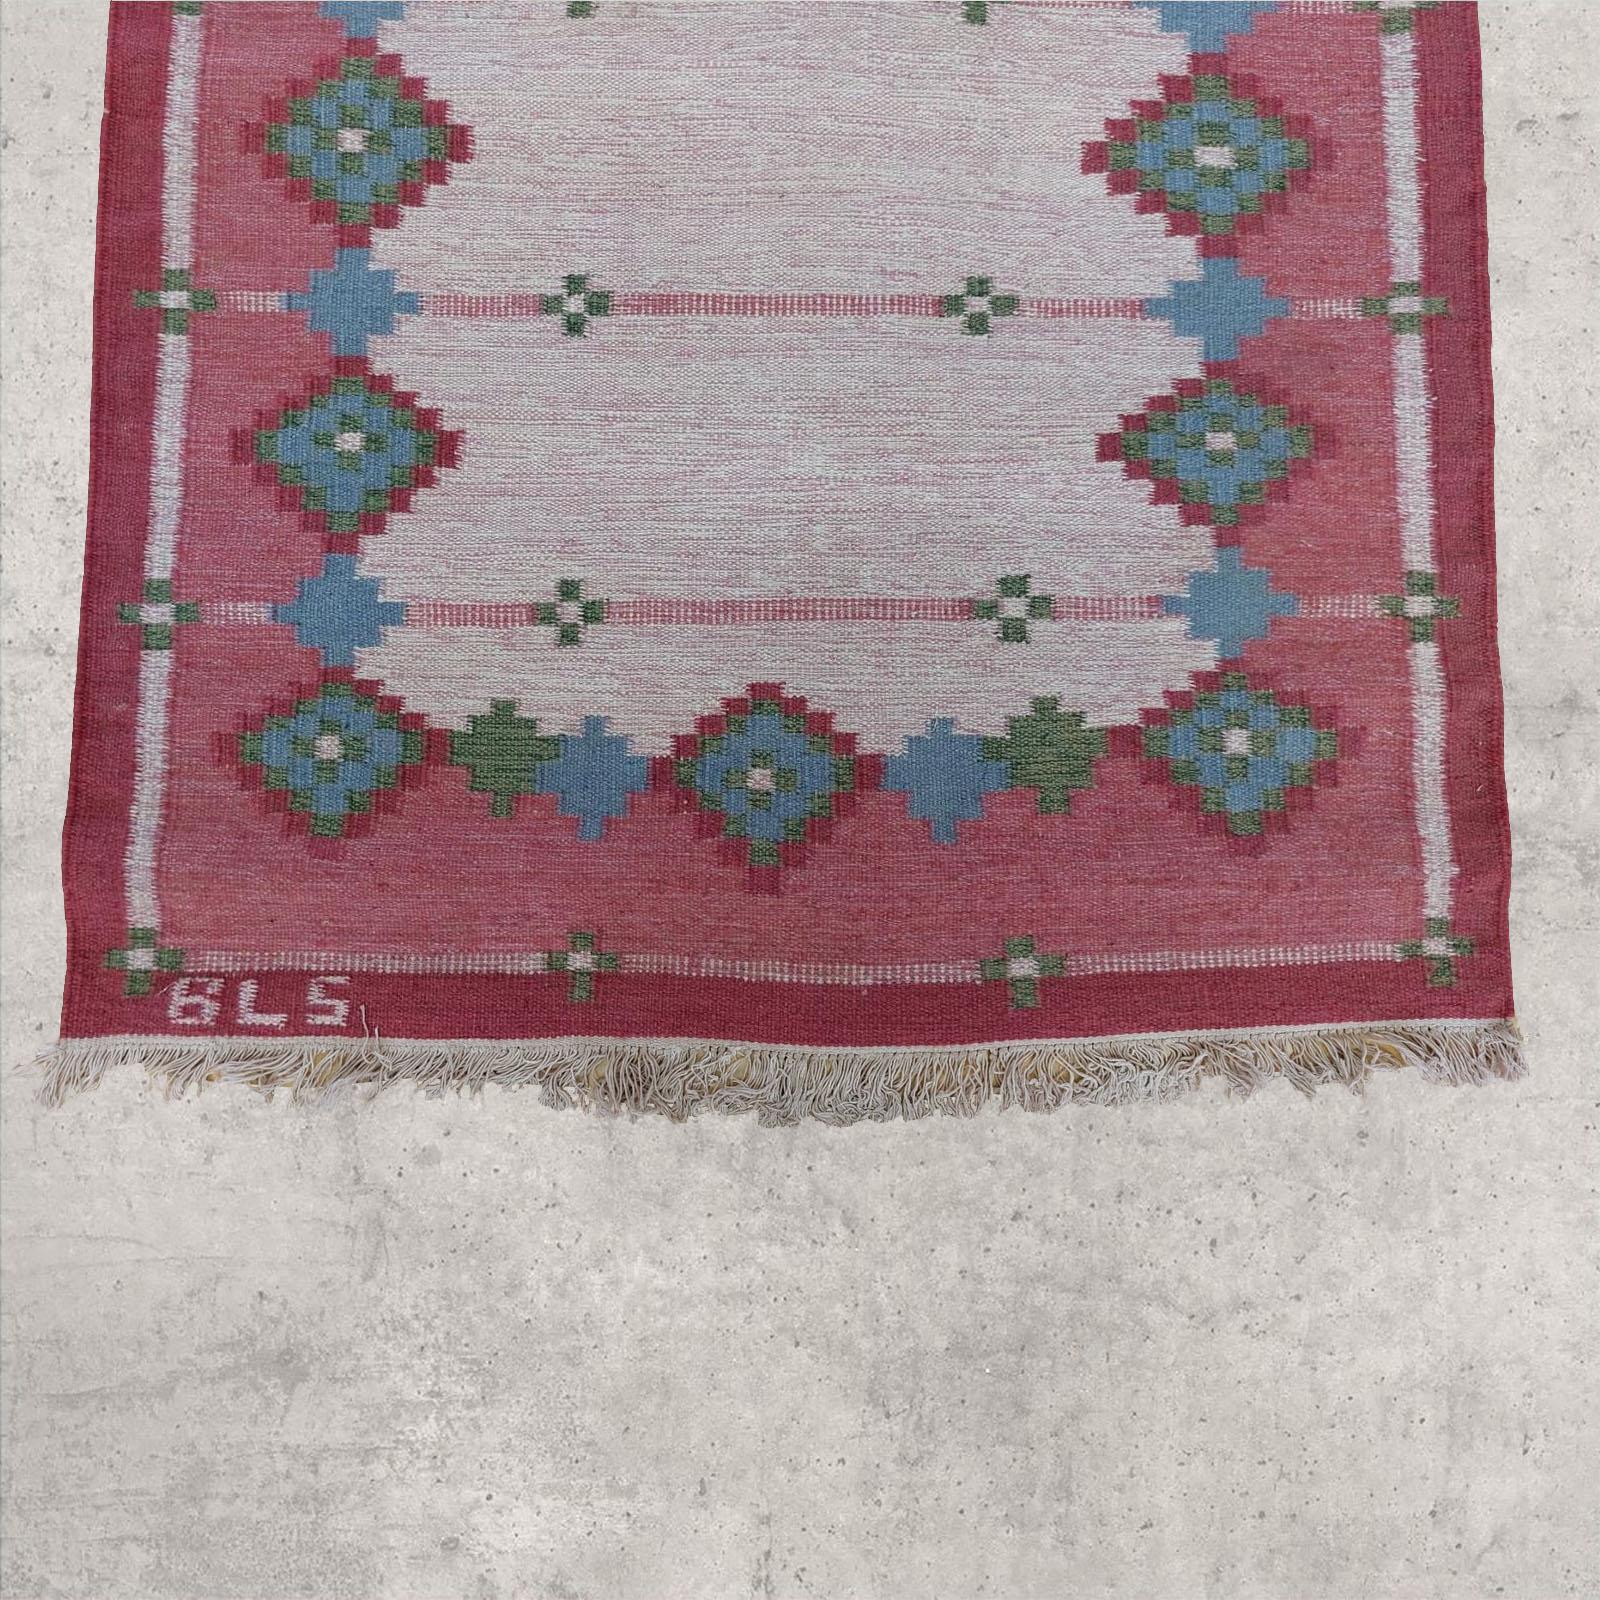 Hand-Woven Vintage Swedish Rollakan Rug with Scandinavian Modern Style Signed BLS For Sale